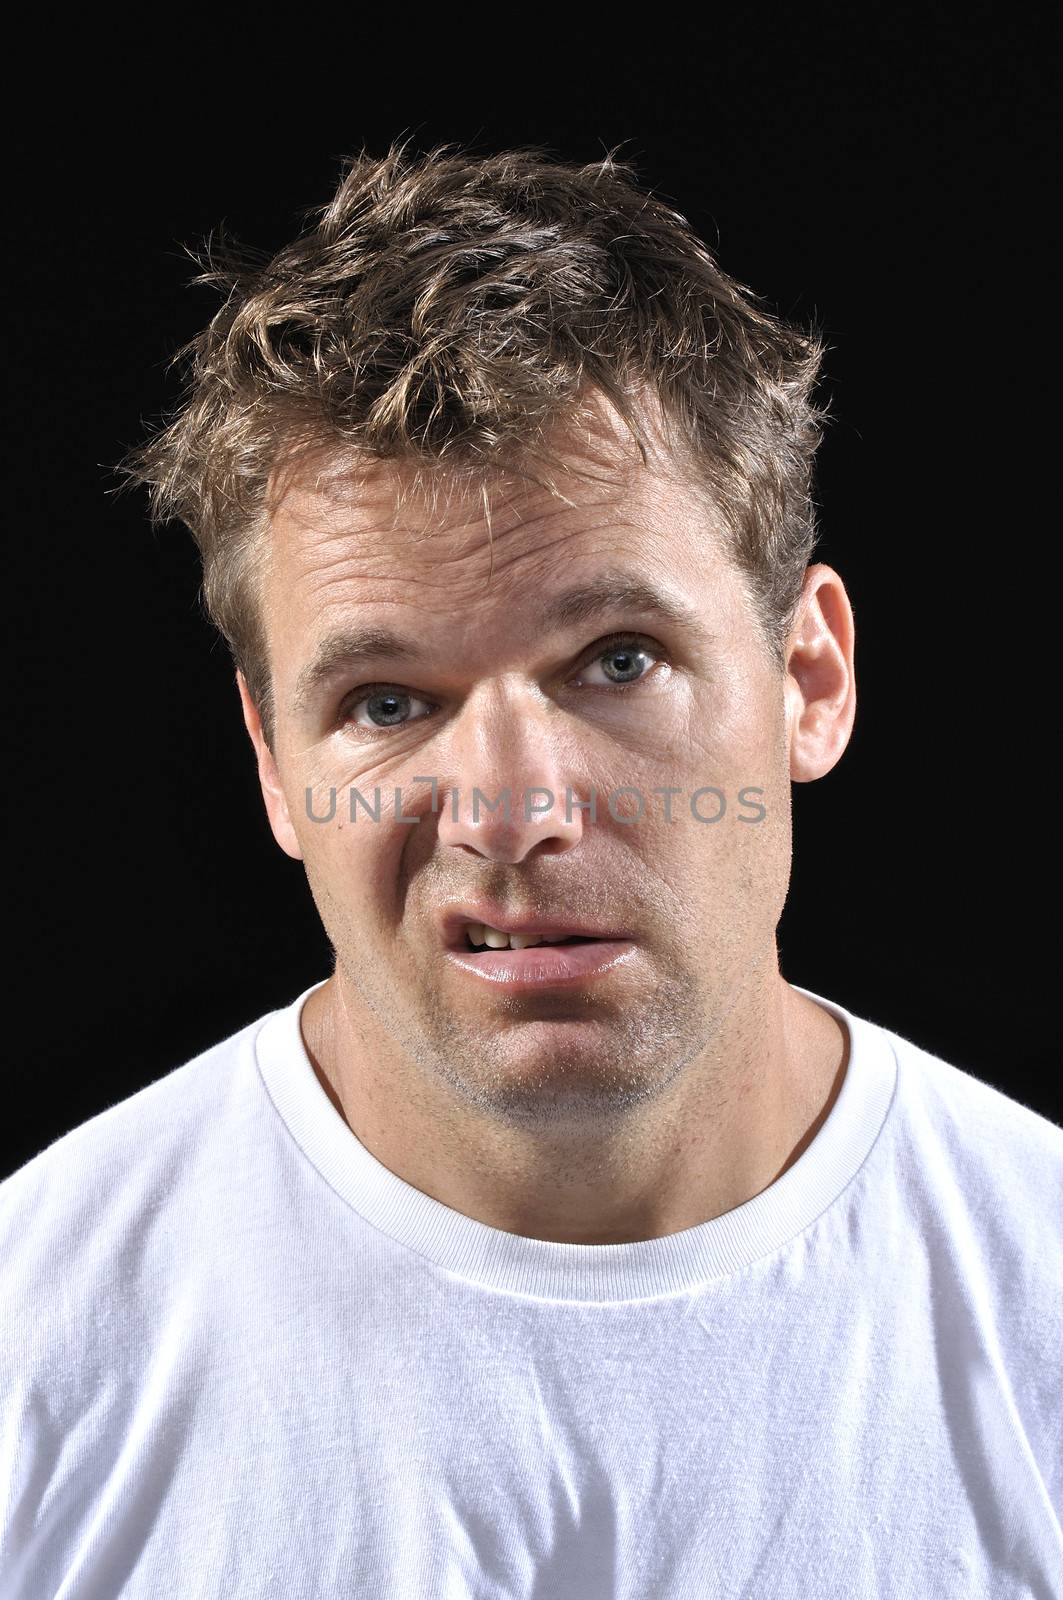 Mug shot of displeased crazy messy Caucasian man wearing a T-shirt on black background